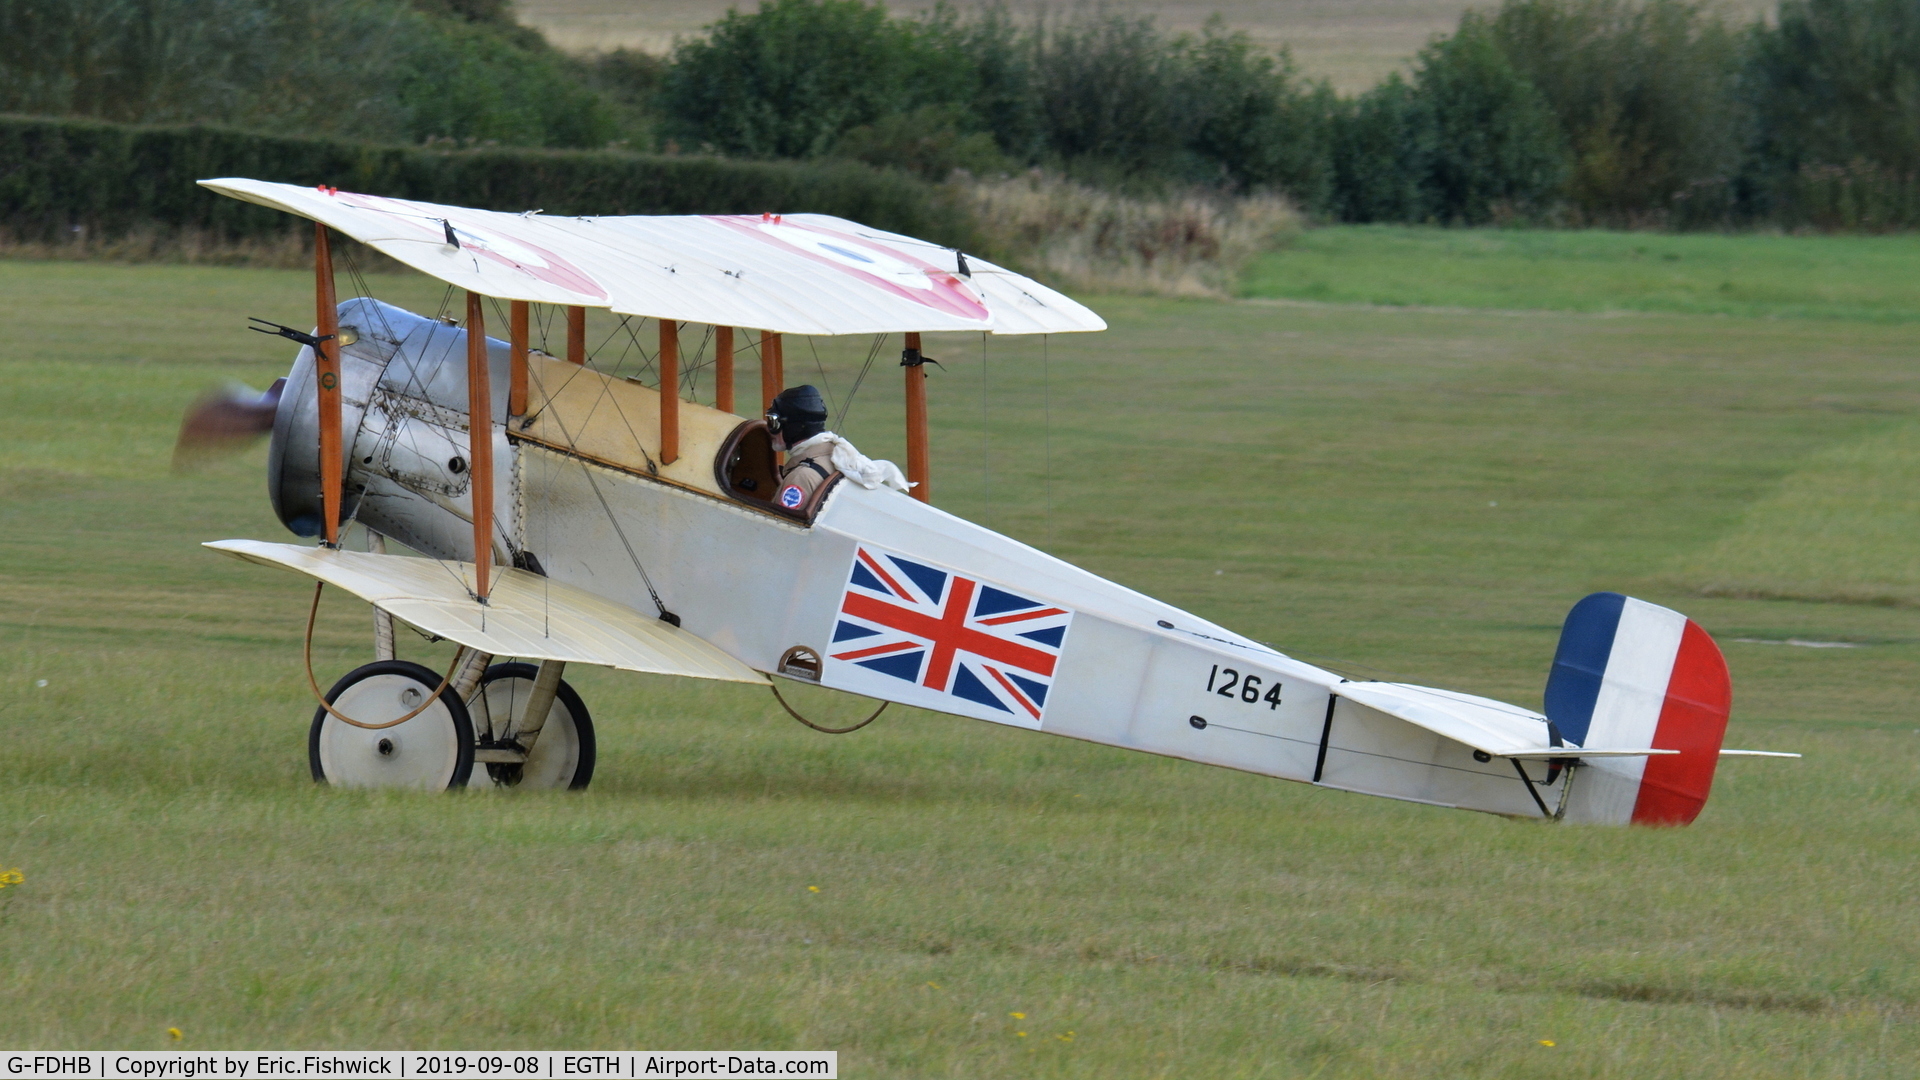 G-FDHB, 2014 Bristol Scout C Replica C/N LAA 353-14755, 1. 1264 at The Shuttleworth Collection, Sept. 2019.